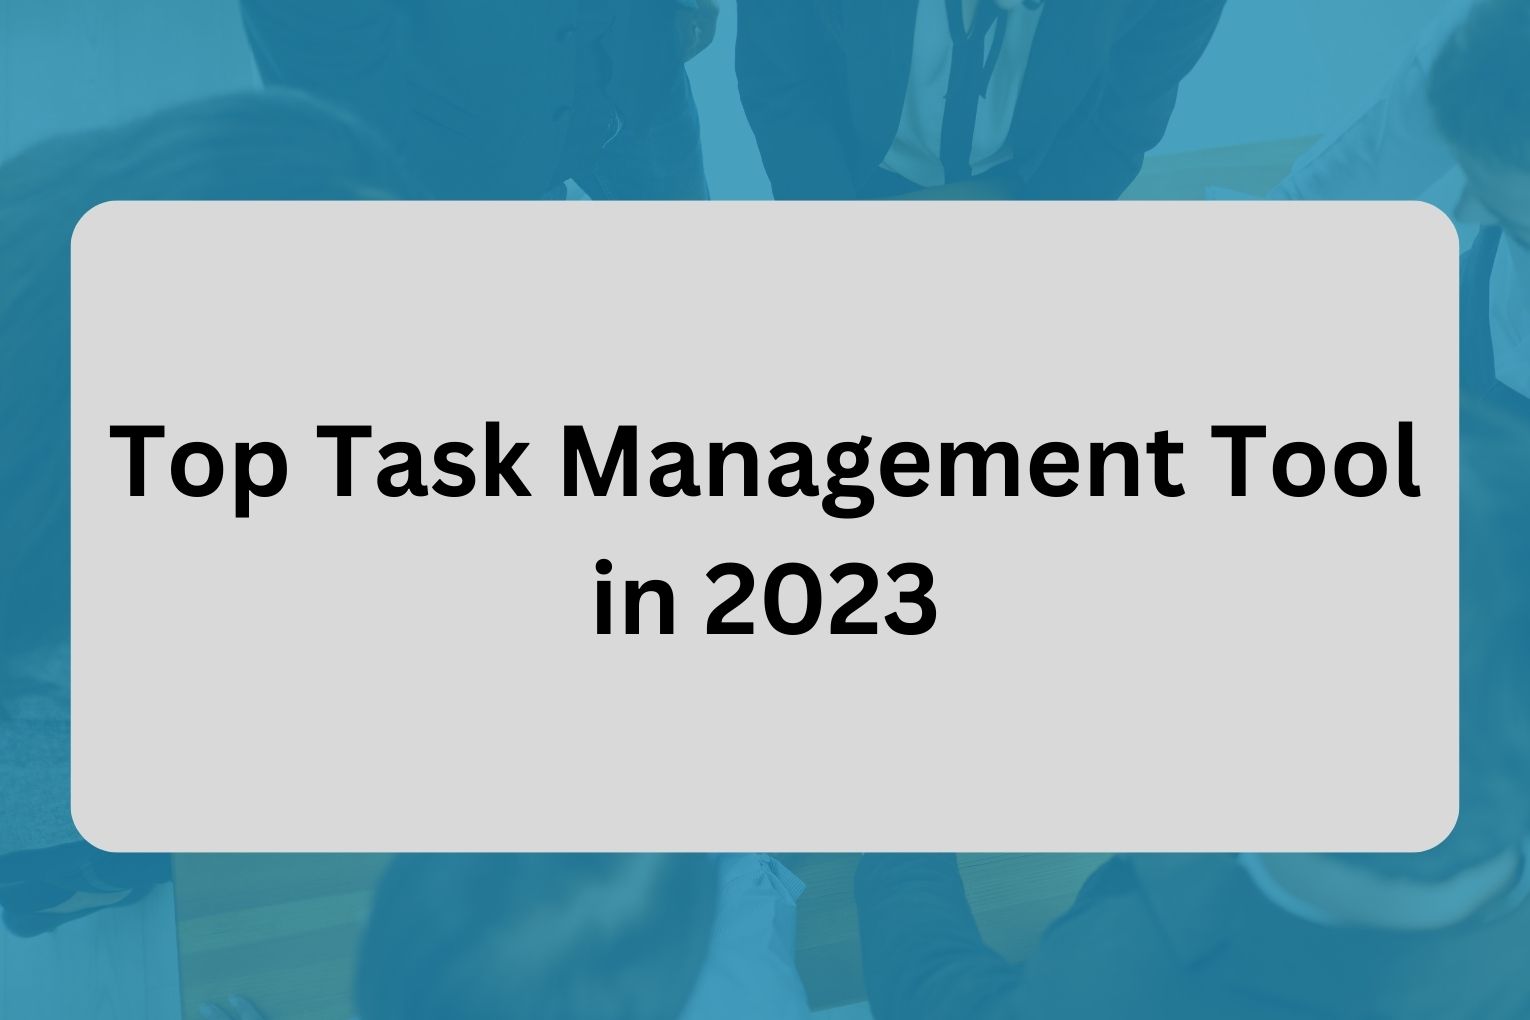 Top Task Management Tool in 2023